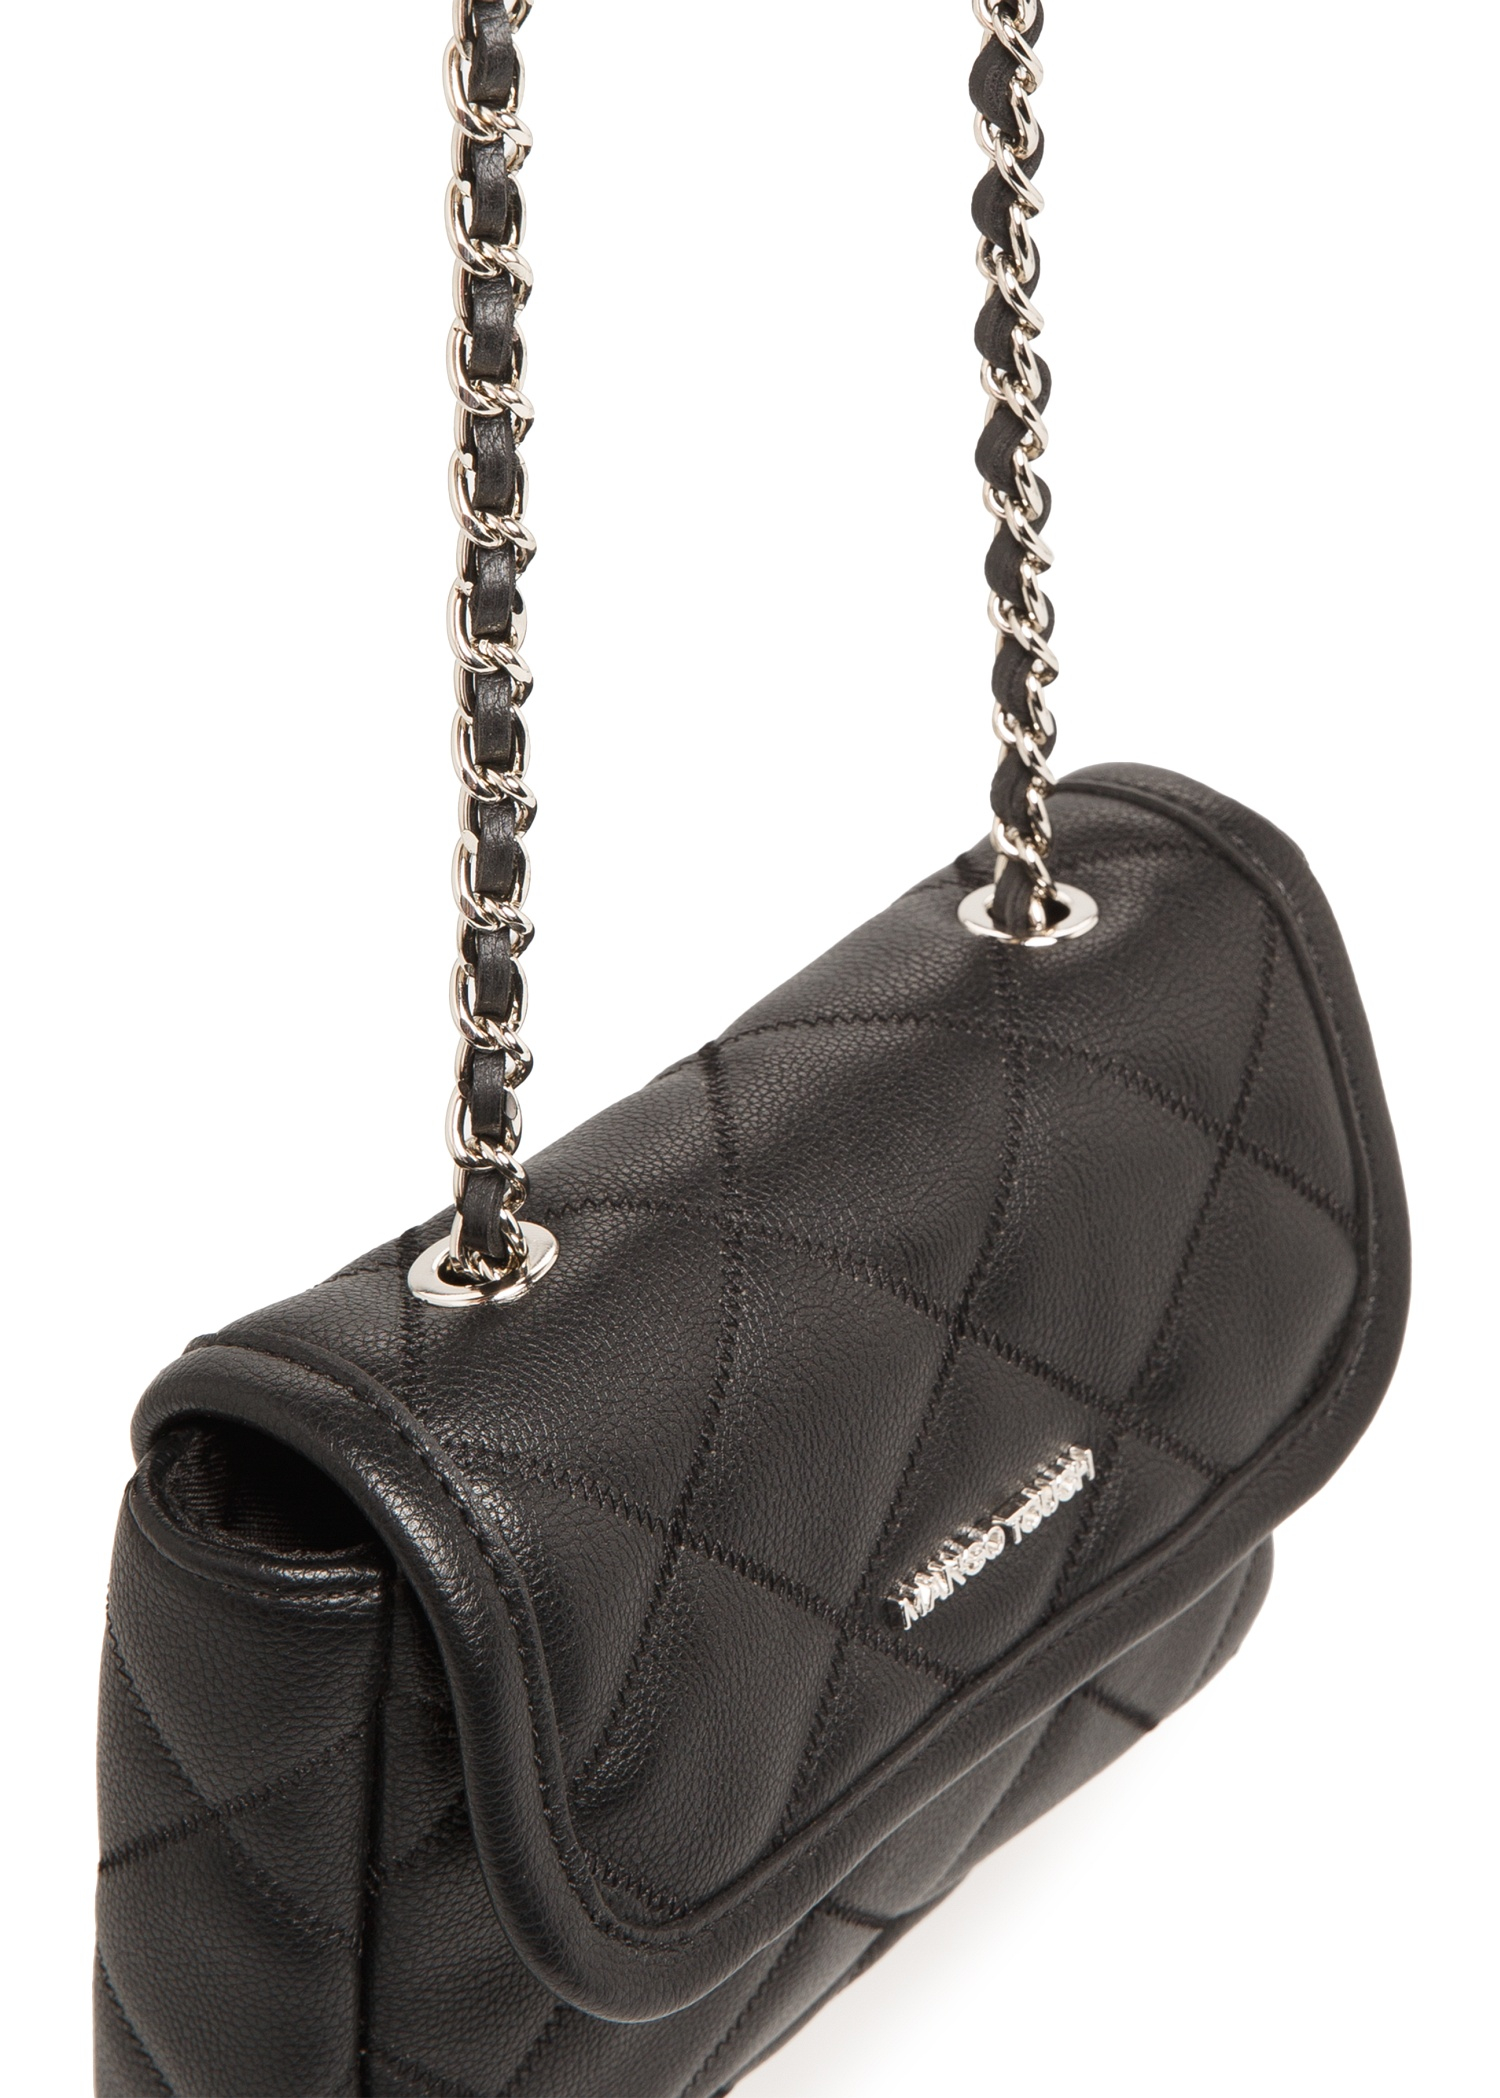 Mango Quilted Mini Cross-Body Bag in Black - Lyst